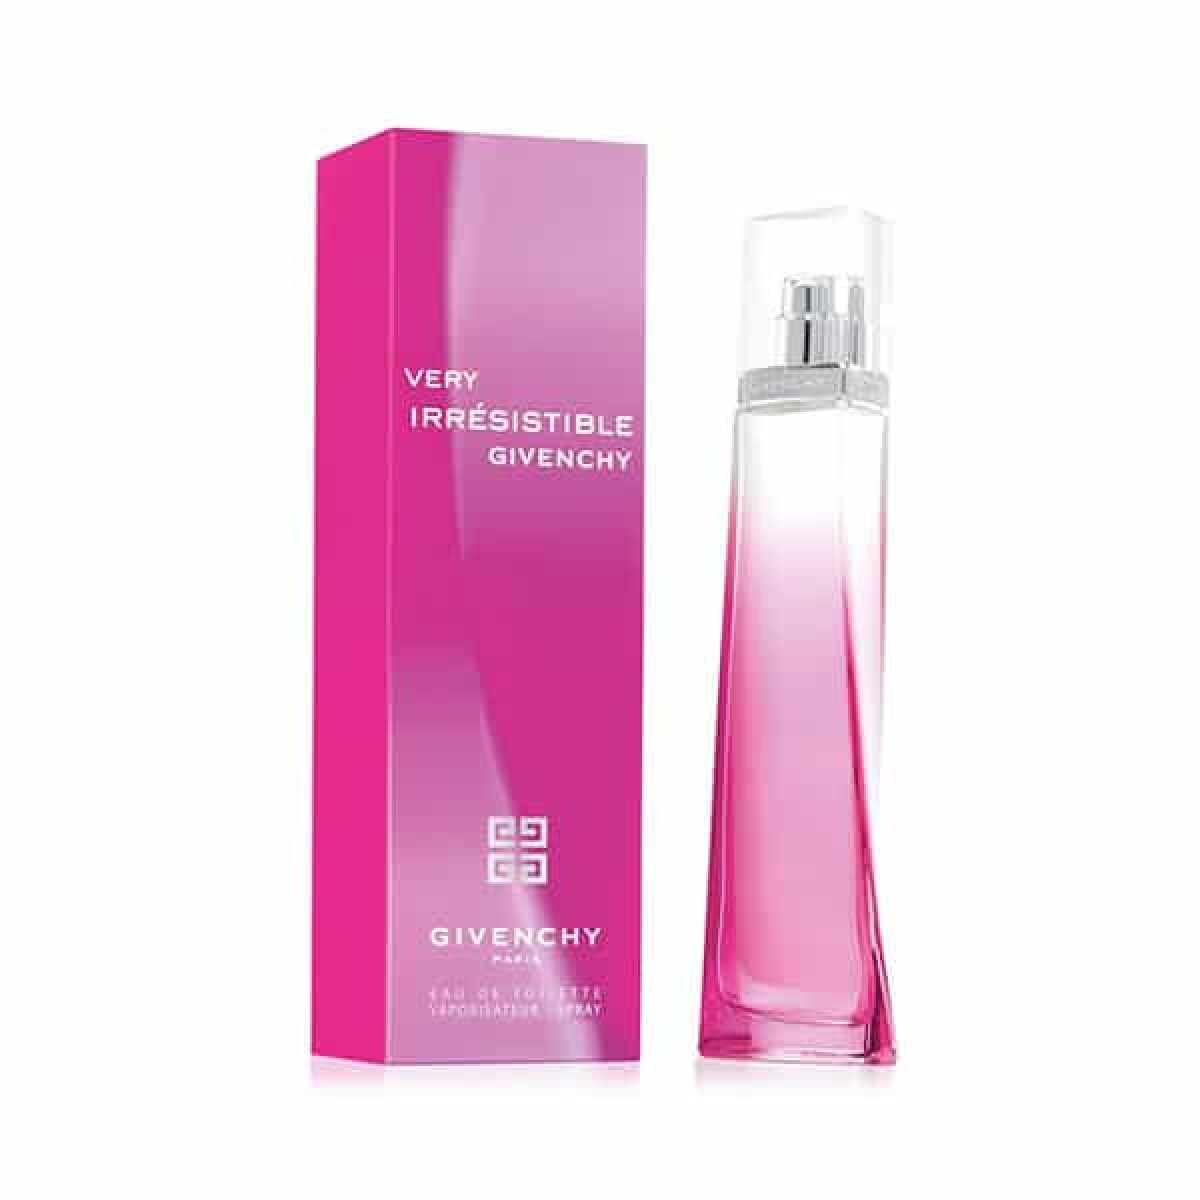 Perfume Givenchy Very Irresistible Edt 75ml 